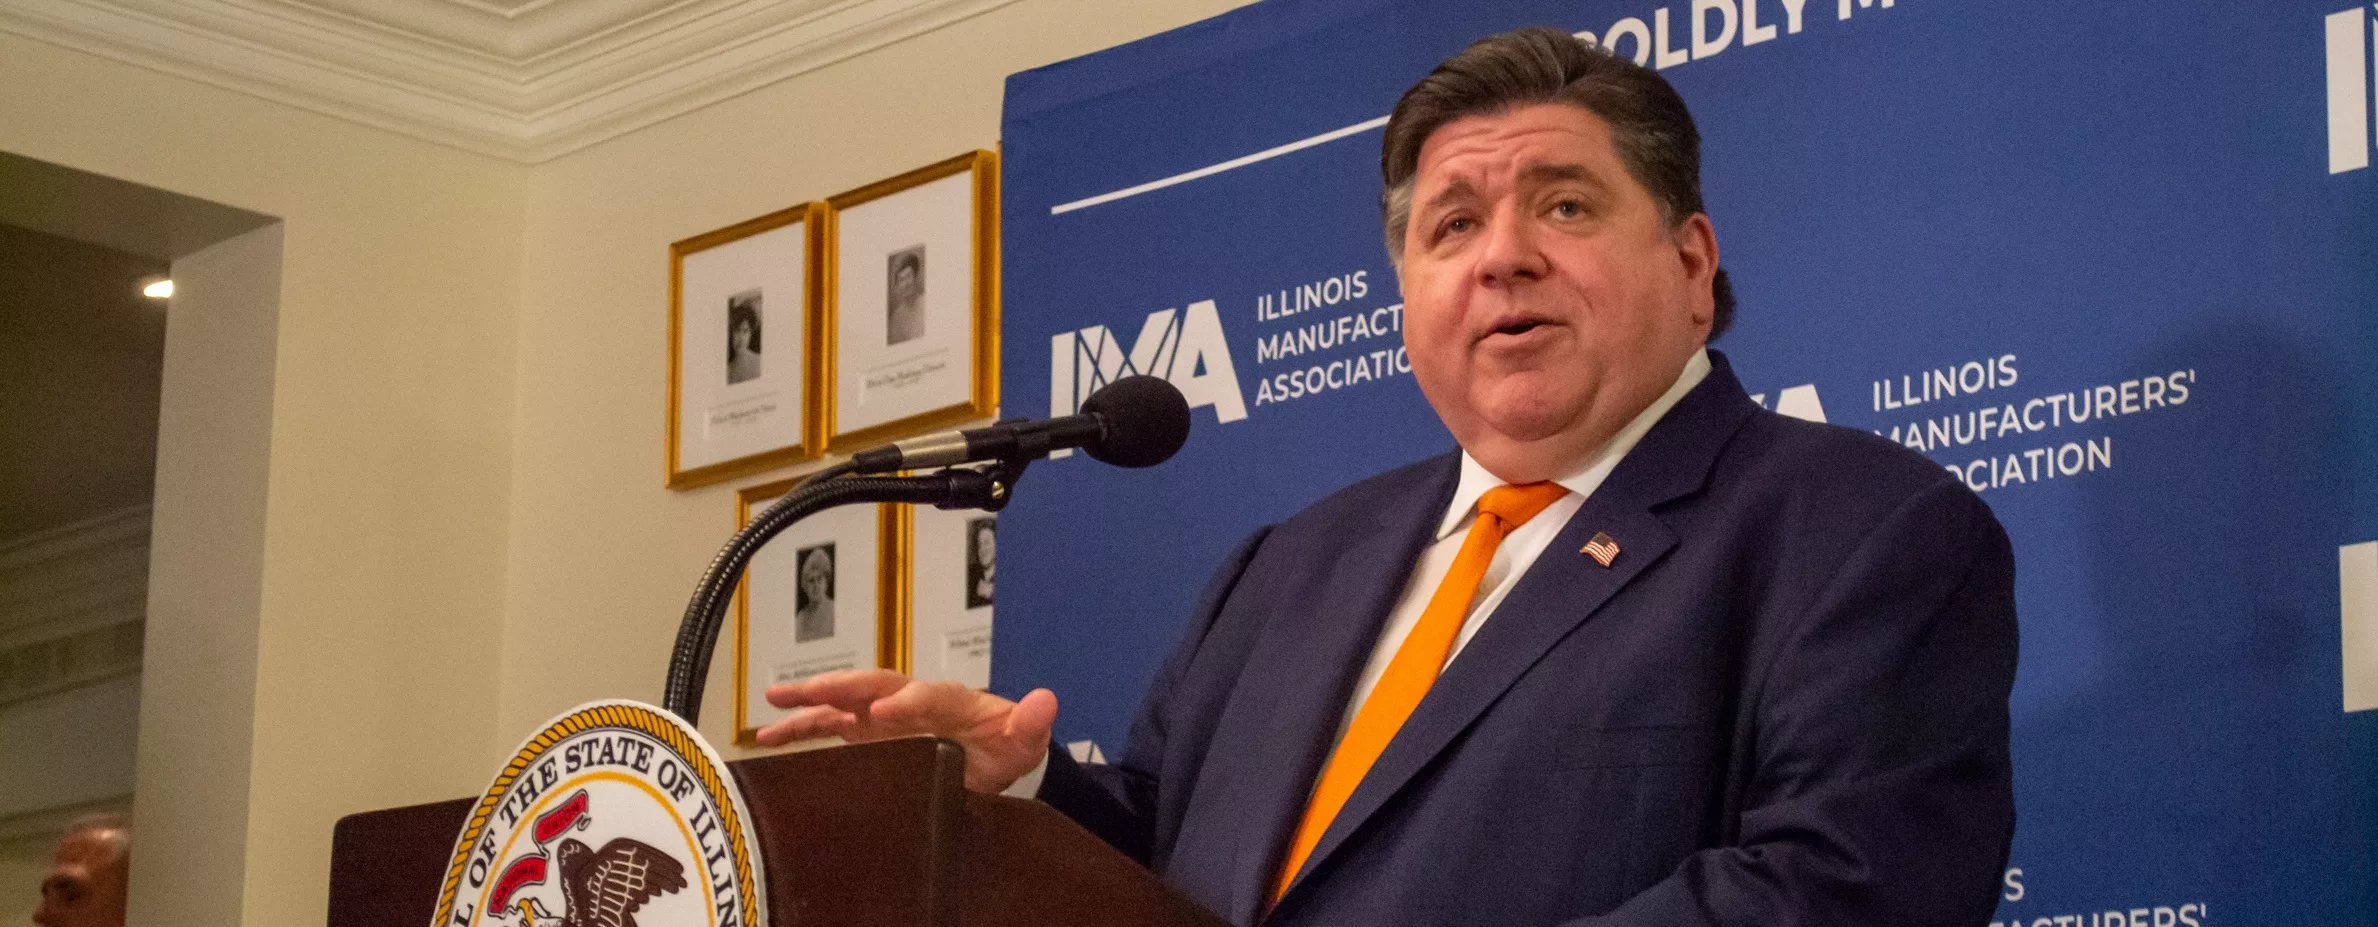 ANALYSIS: ‘Significant enough’ opposition to Pritzker’s revenue plan leads to call for cuts